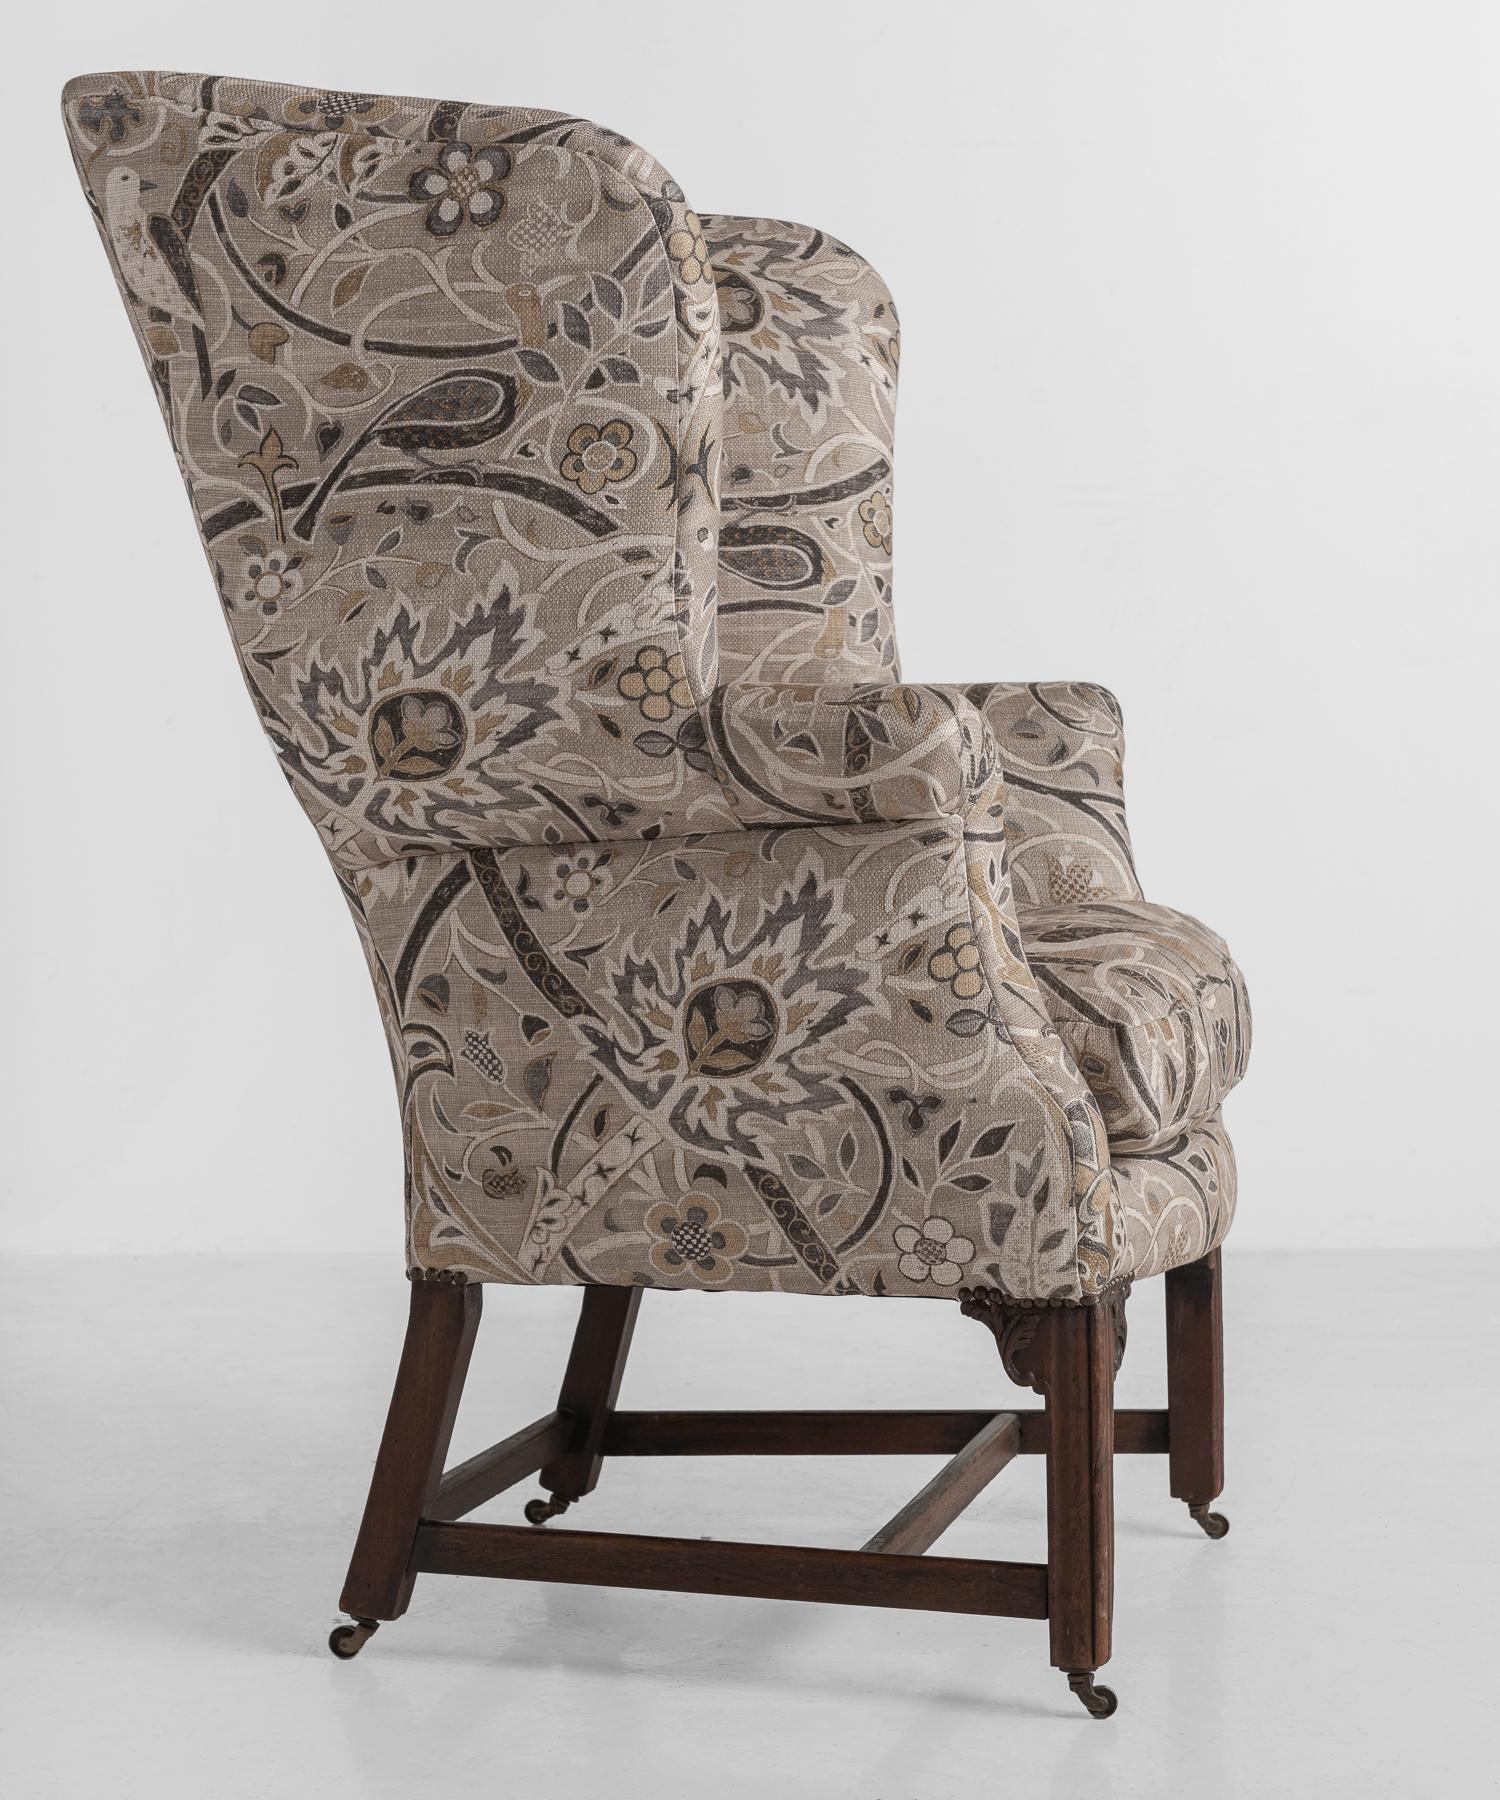 Georgian Linen Wingback Chair, England, circa 1760

George III mahogany wing chair with serpentine seat rail, newly upholstered in linen Morris & Co. fabric.